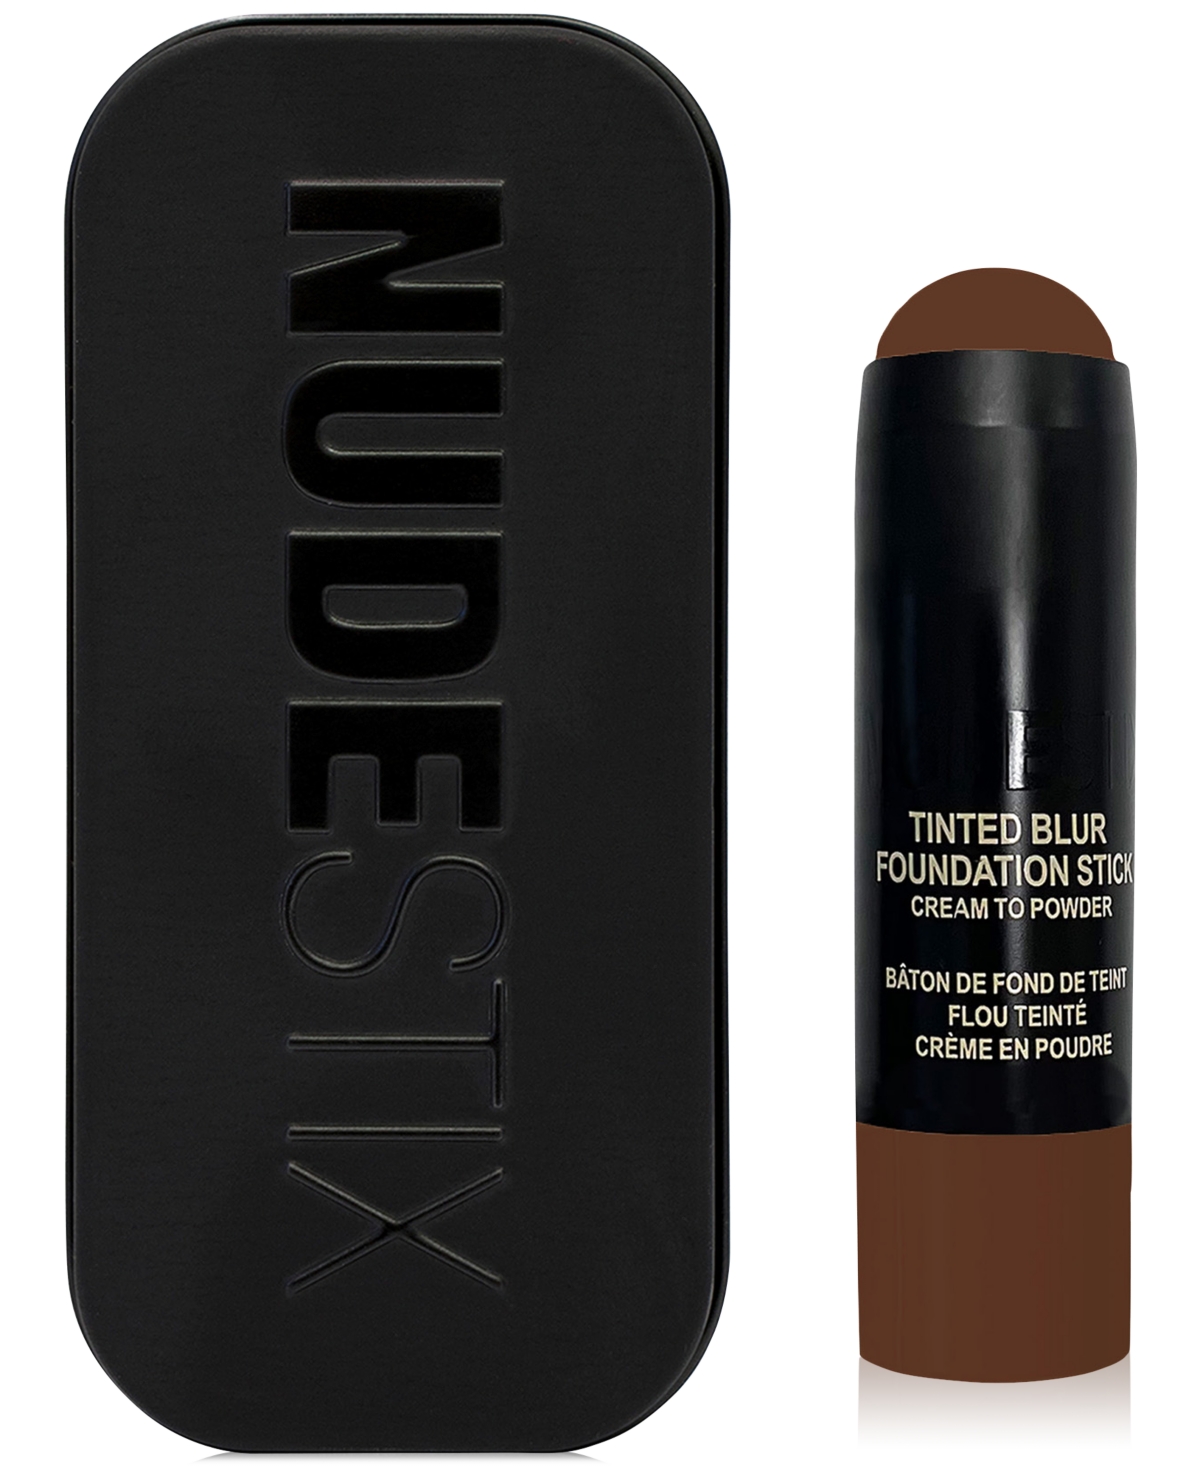 Tinted Blur Foundation Stick - Nude . (deep tan with neutral undertone)